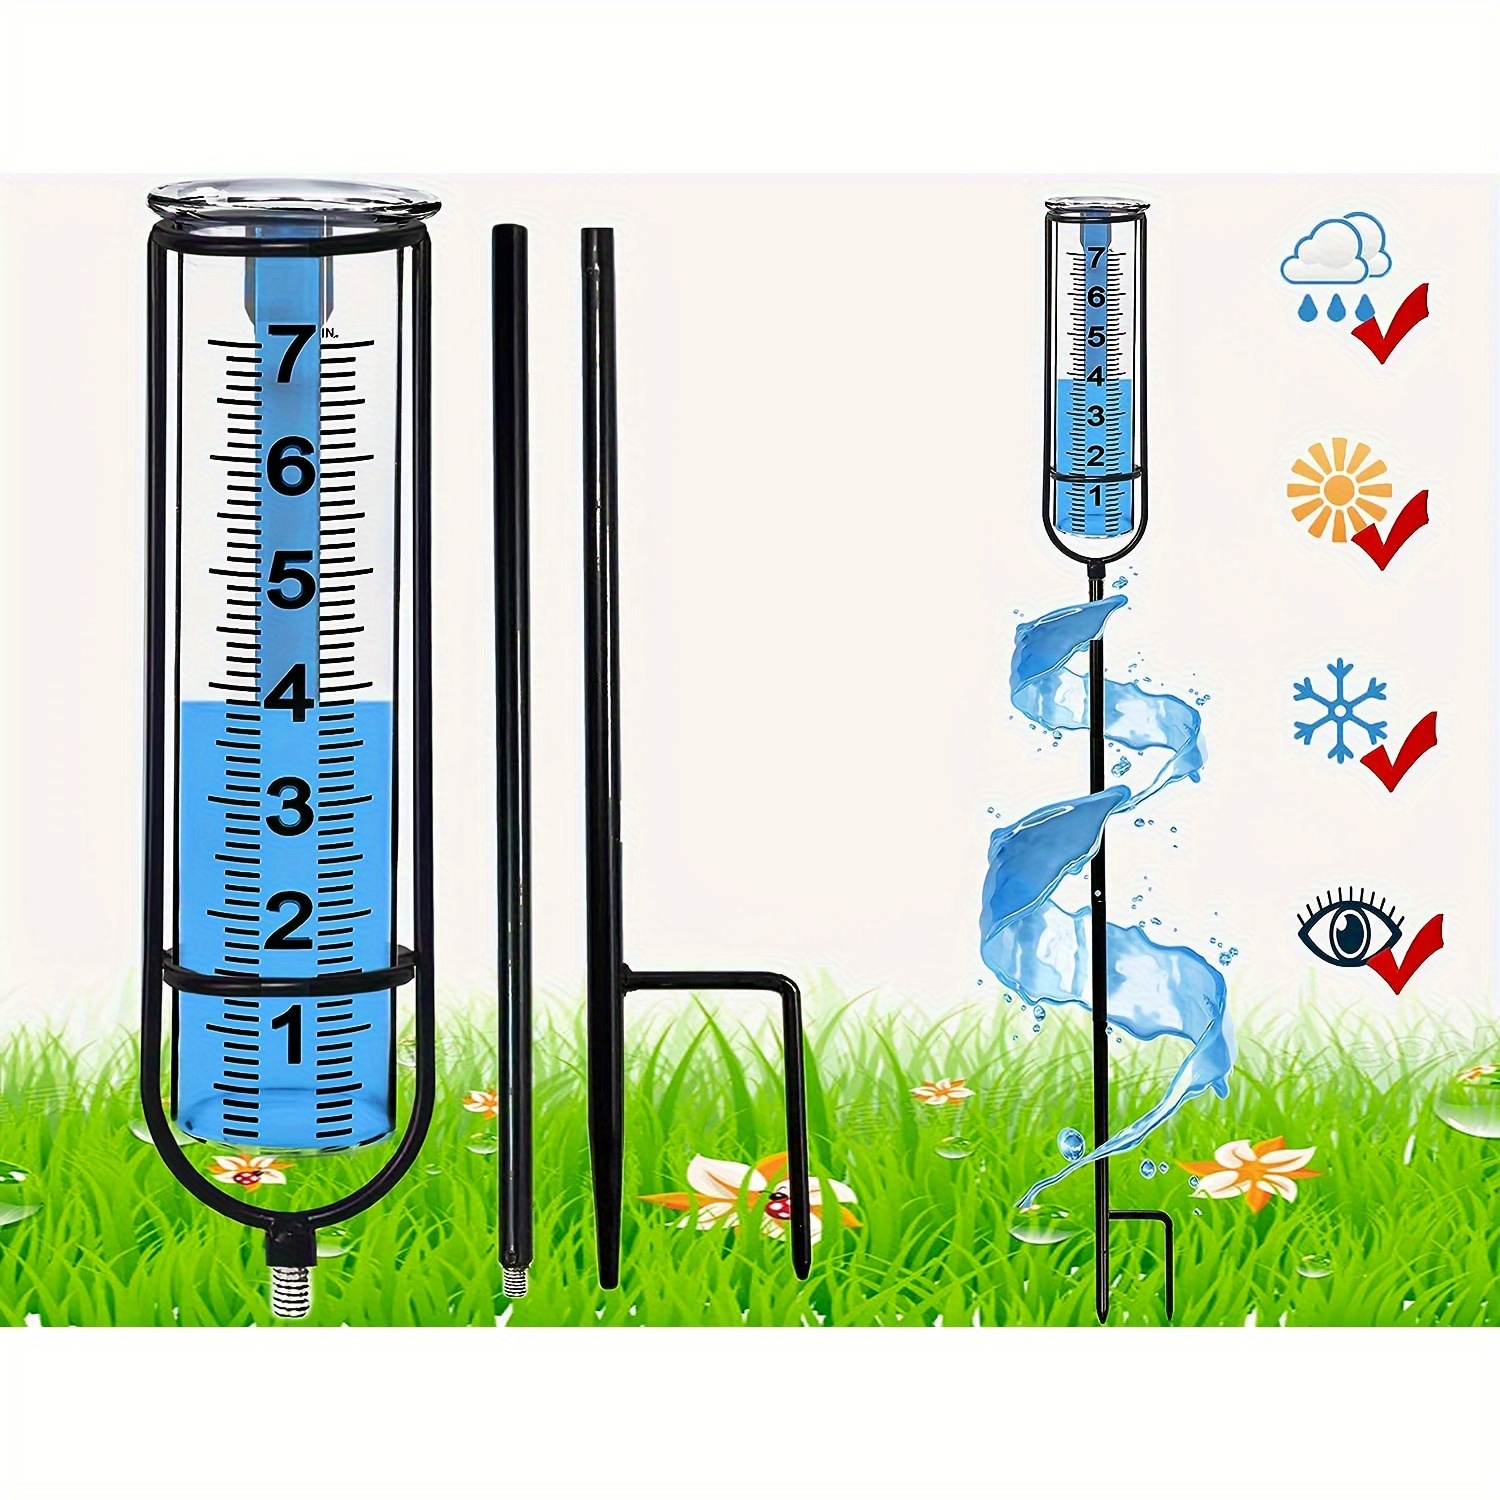 

Freeze-proof Outdoor Rain Gauge With Stake - Decorative, Adjustable Height For Garden, Deck, Lawn - Large Numbers, Durable Plastic